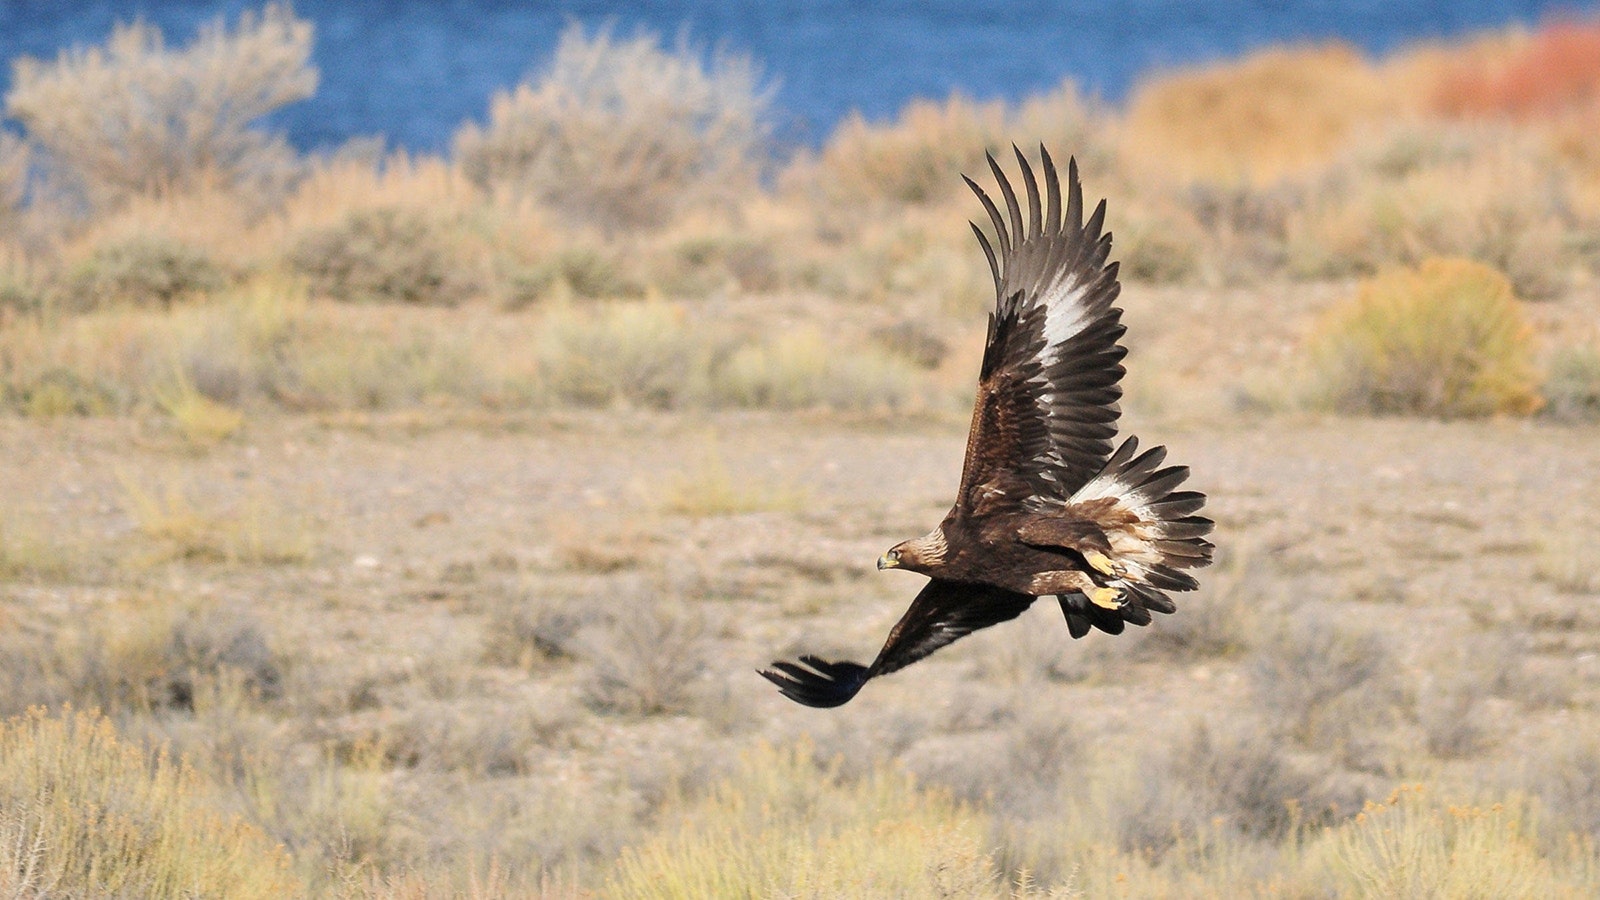 Golden eagles are found through out the West and Wyoming.